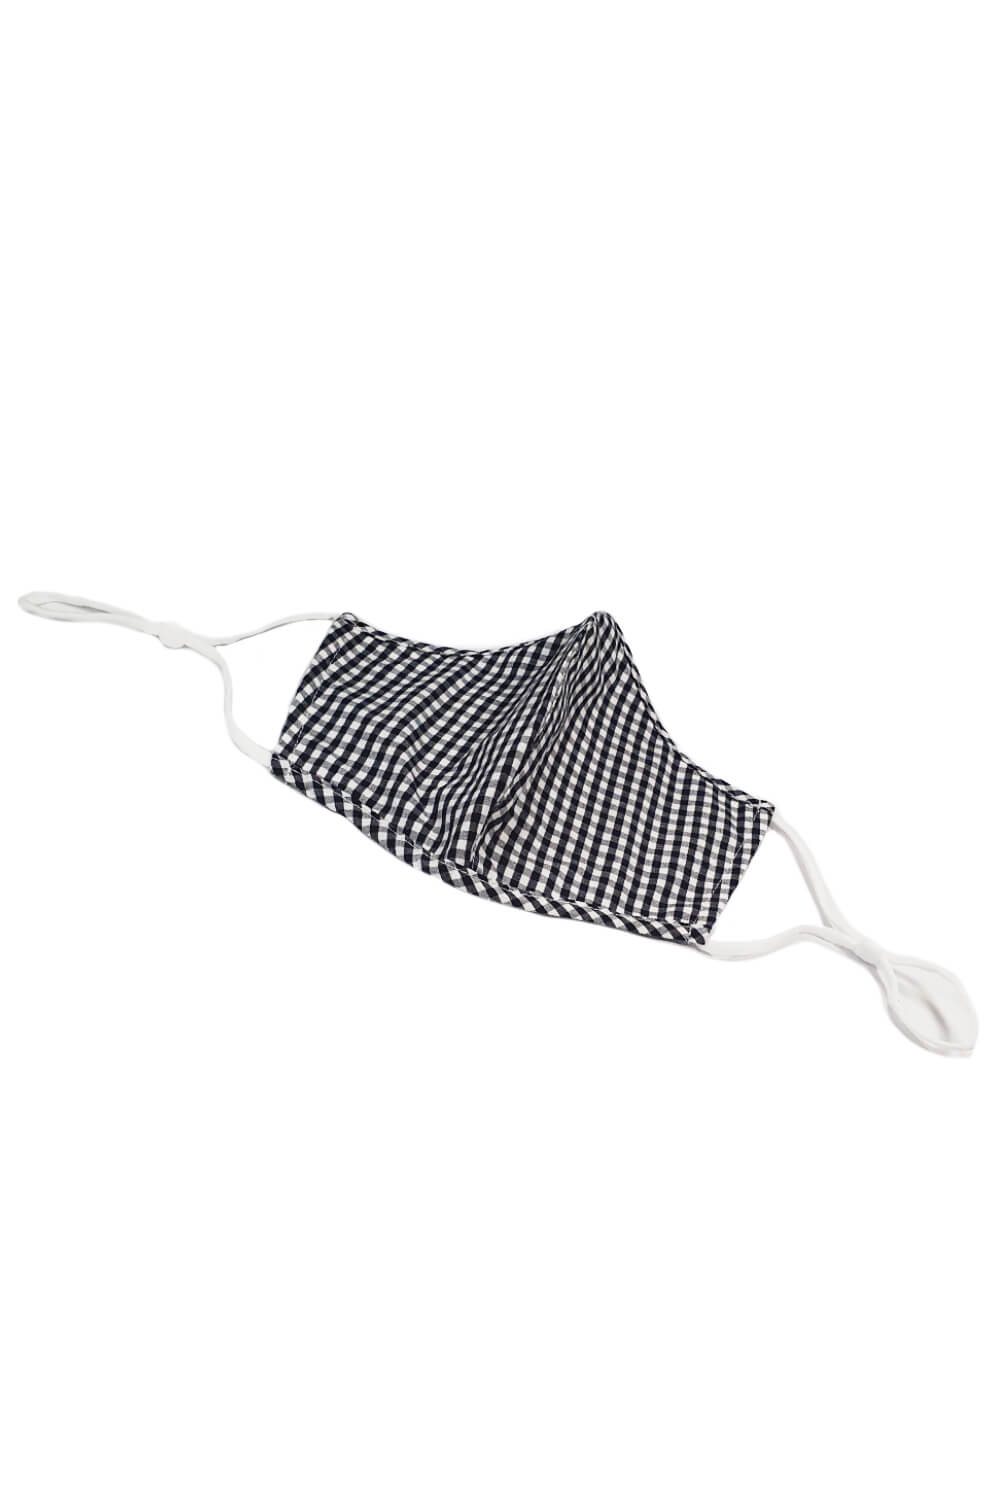 Navy  Gingham Check Fast Drying Fashion Face Mask, Image 2 of 2